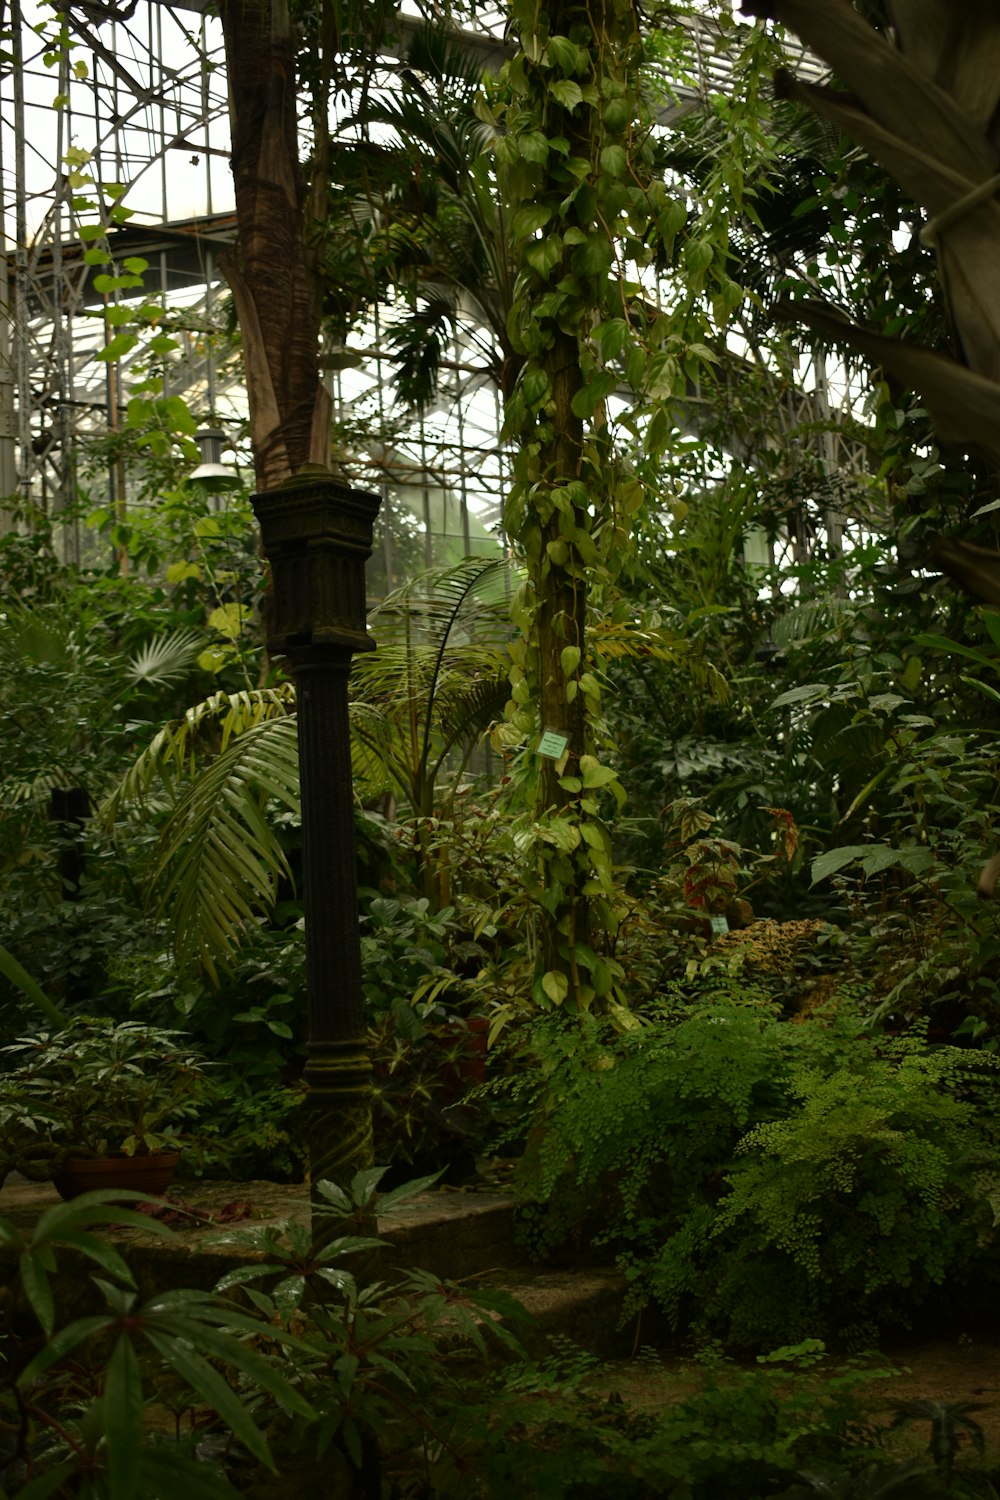 black metal post surrounded by green plants